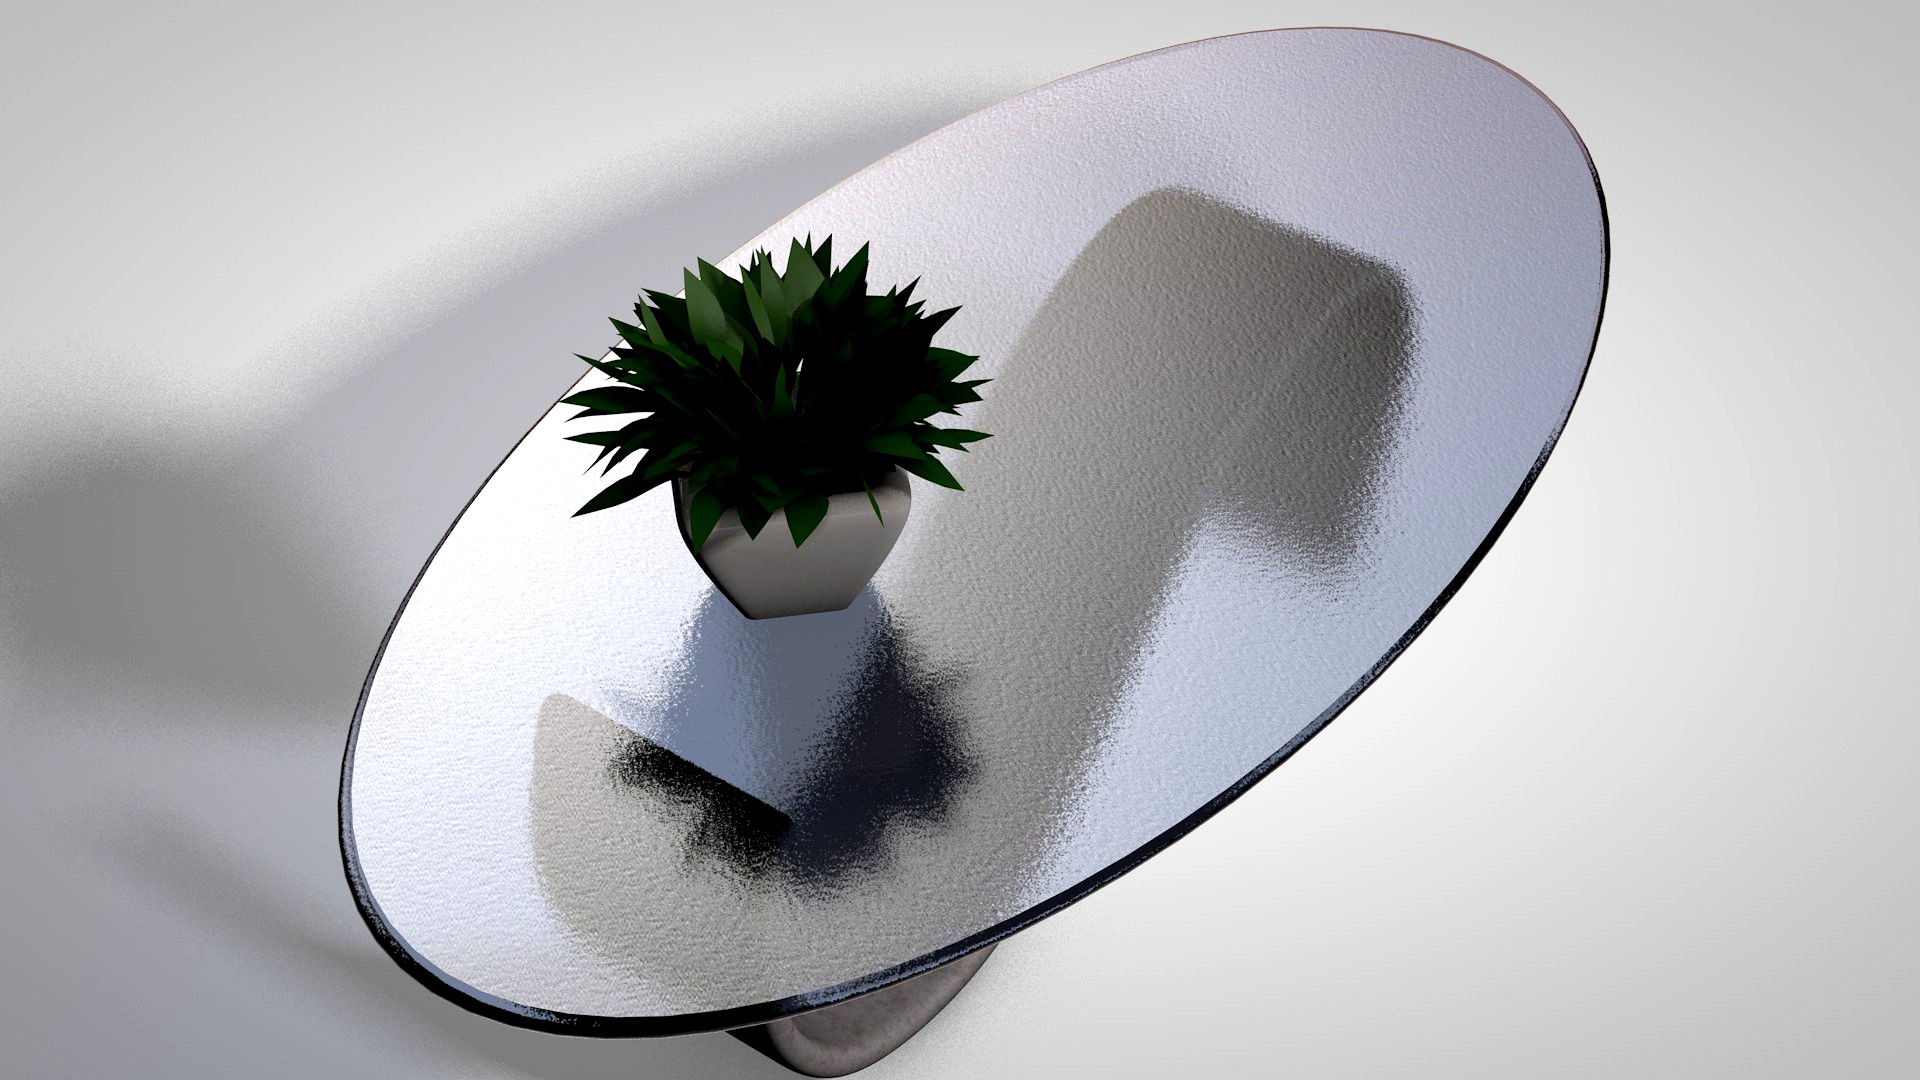 Coffee table + plant